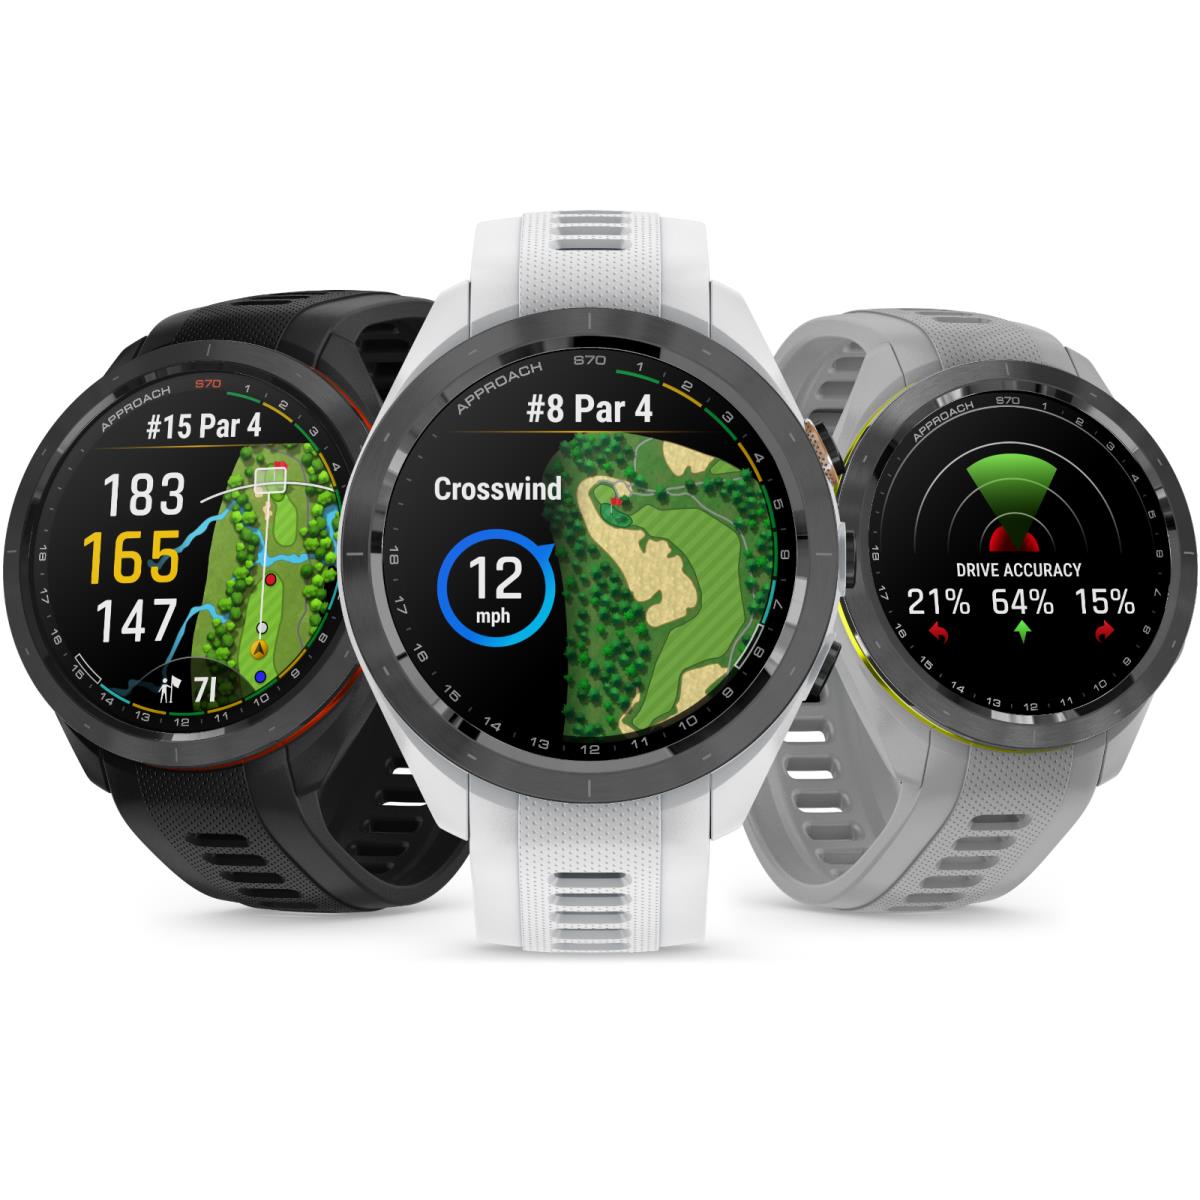 Garmin Approach S70 Golf Gps Smartwatch with Amoled Display 43K Courses